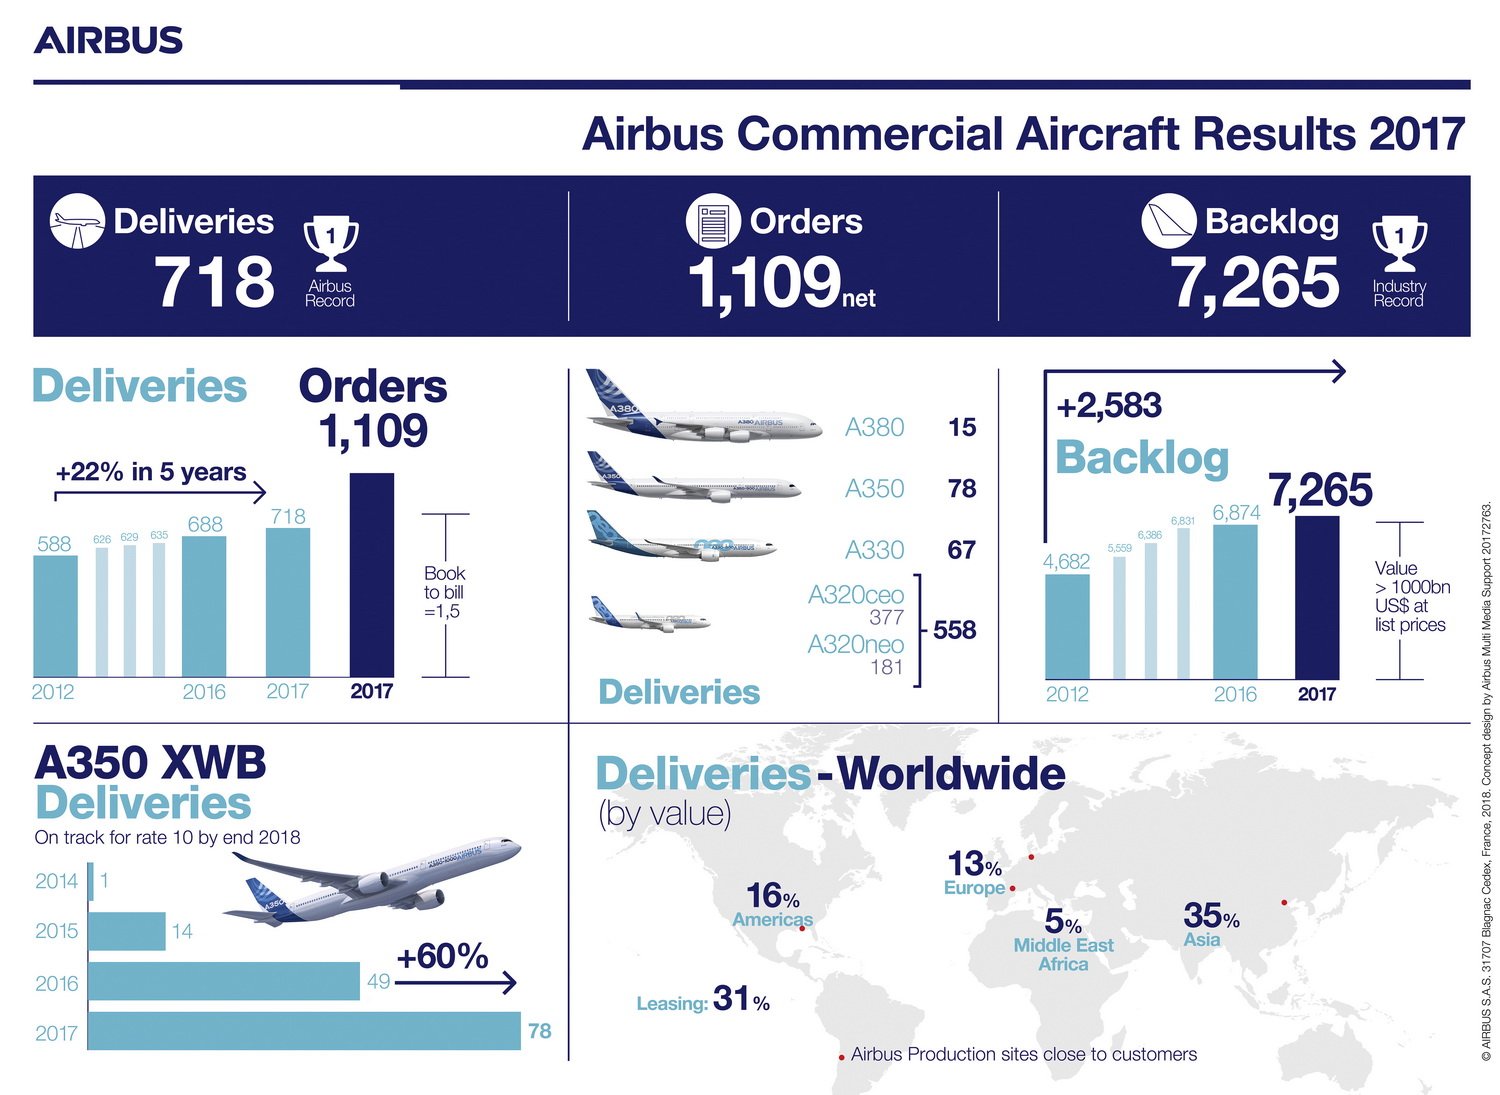 Airbus sees record commercial aircraft deliveries in 2017